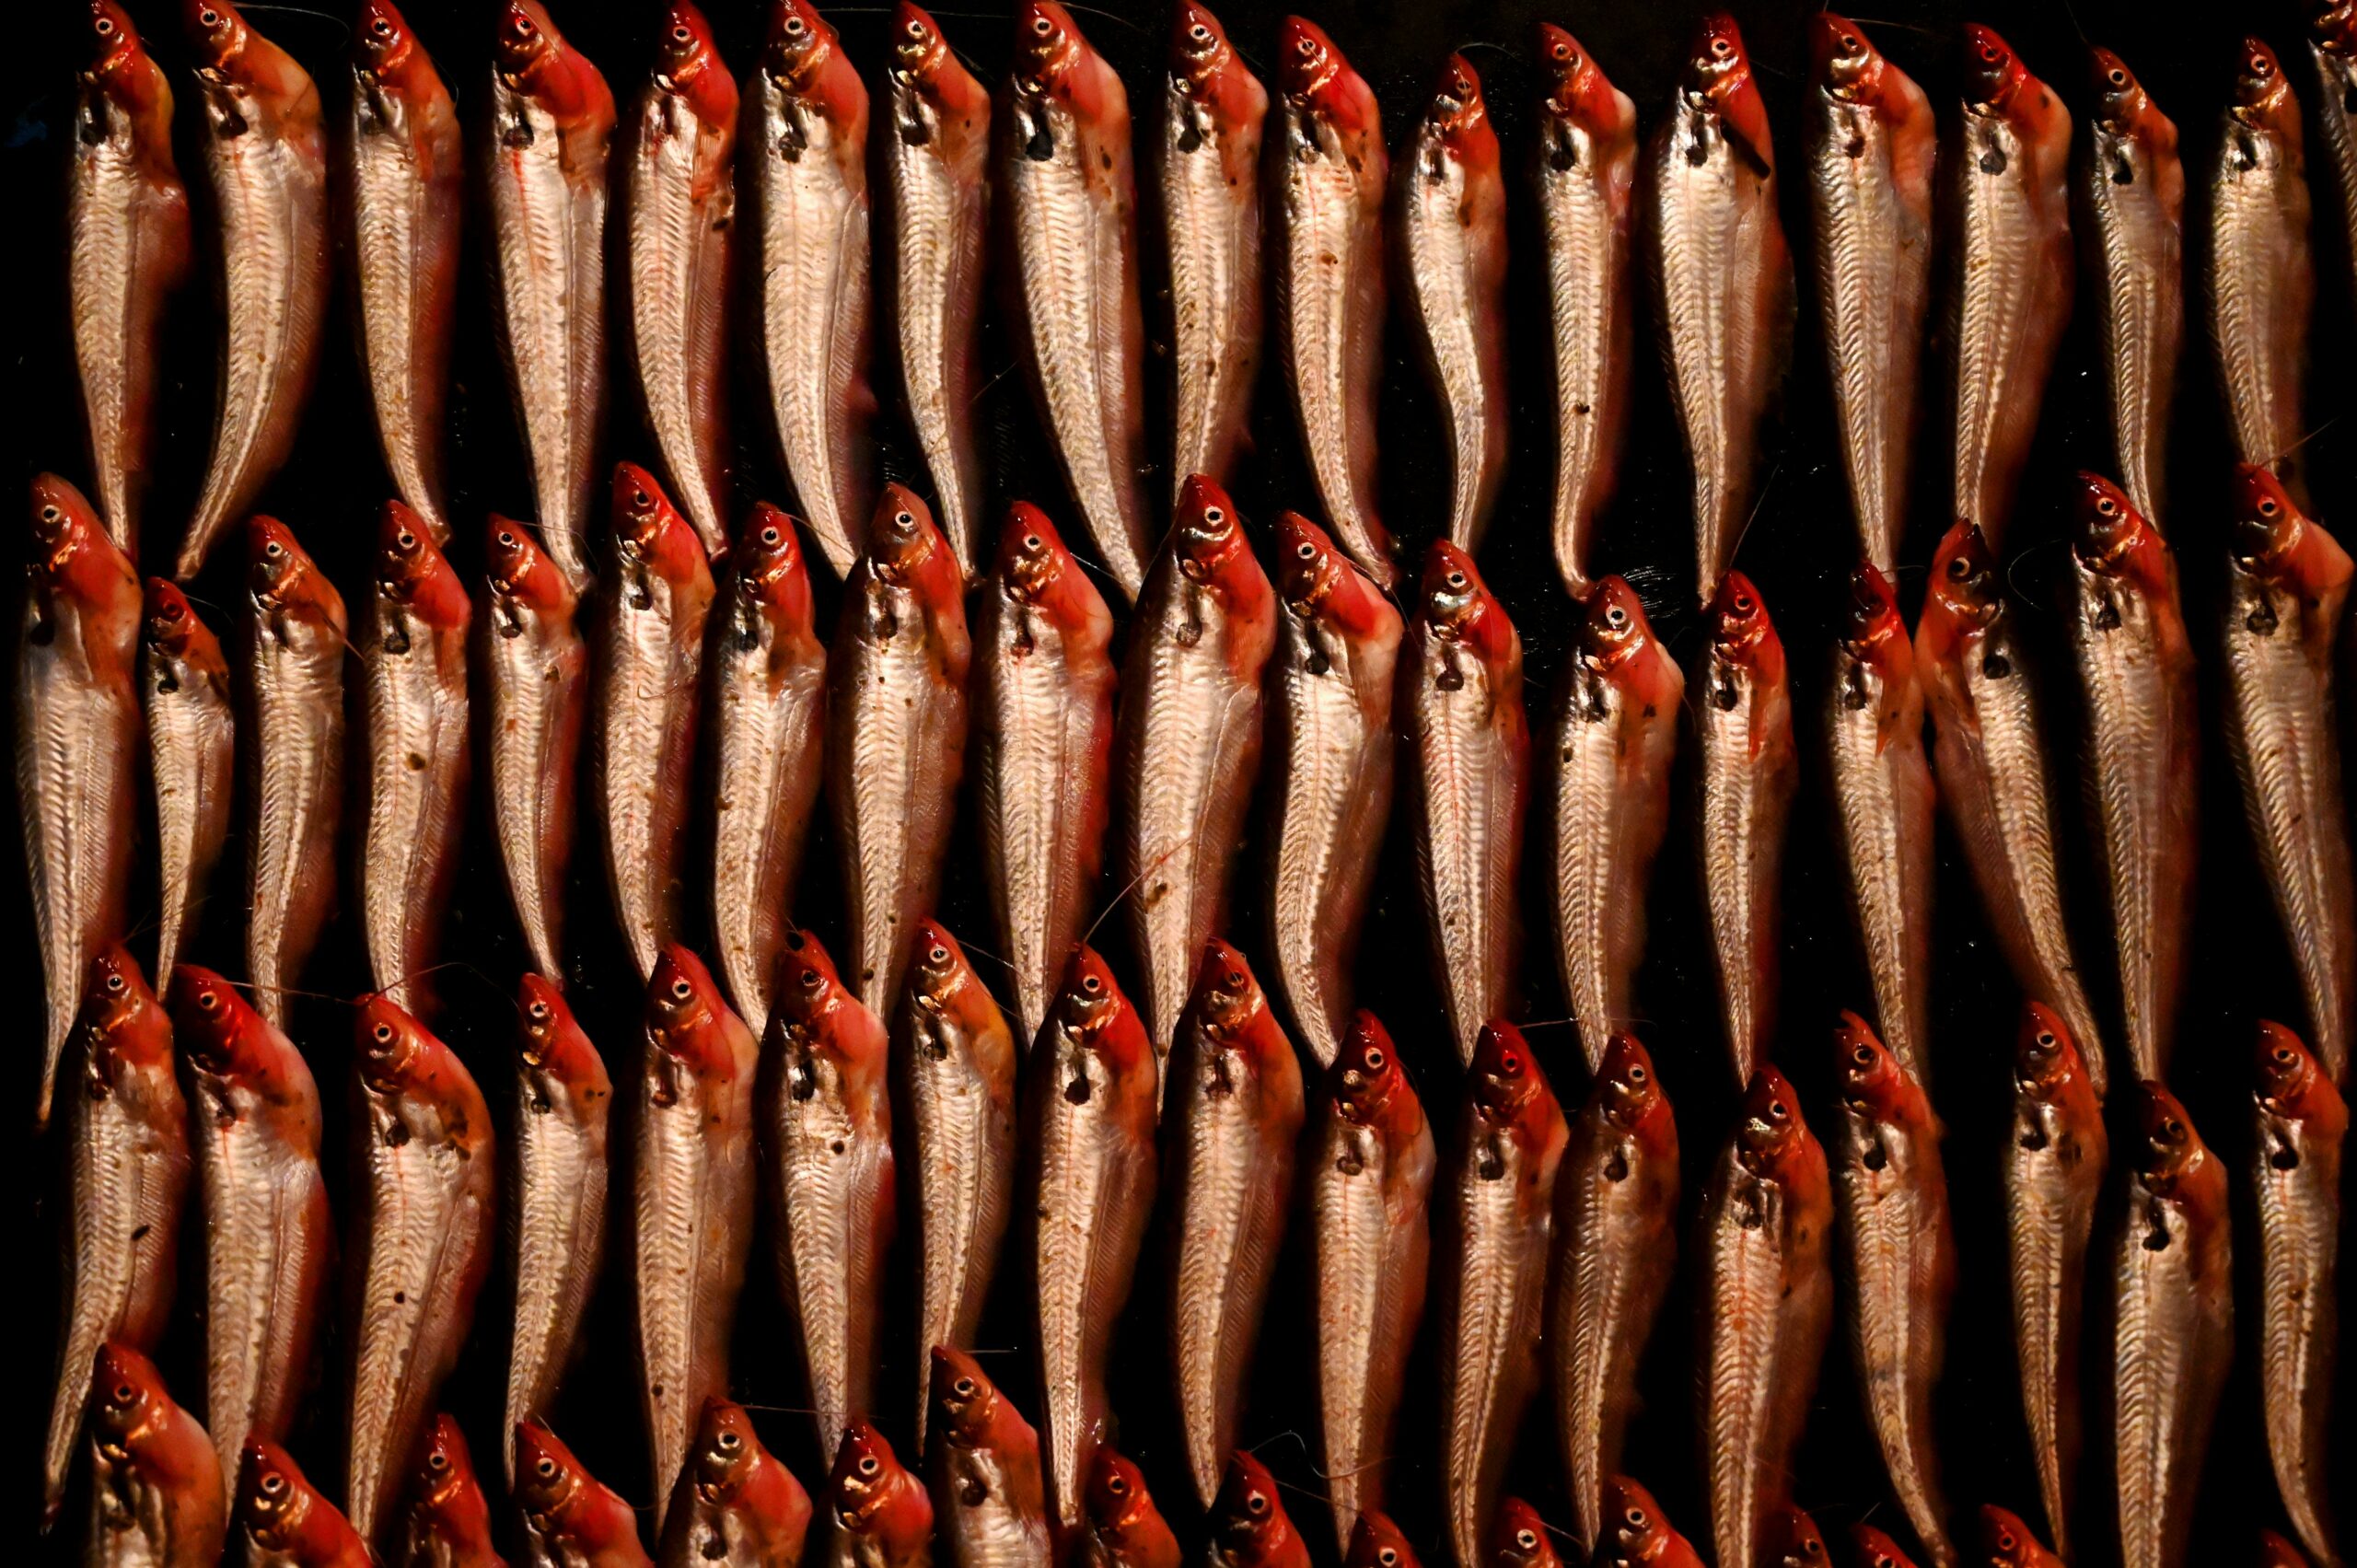 Photo by Mumtahina Tanni: https://www.pexels.com/photo/anchovies-laid-in-rows-6683132/